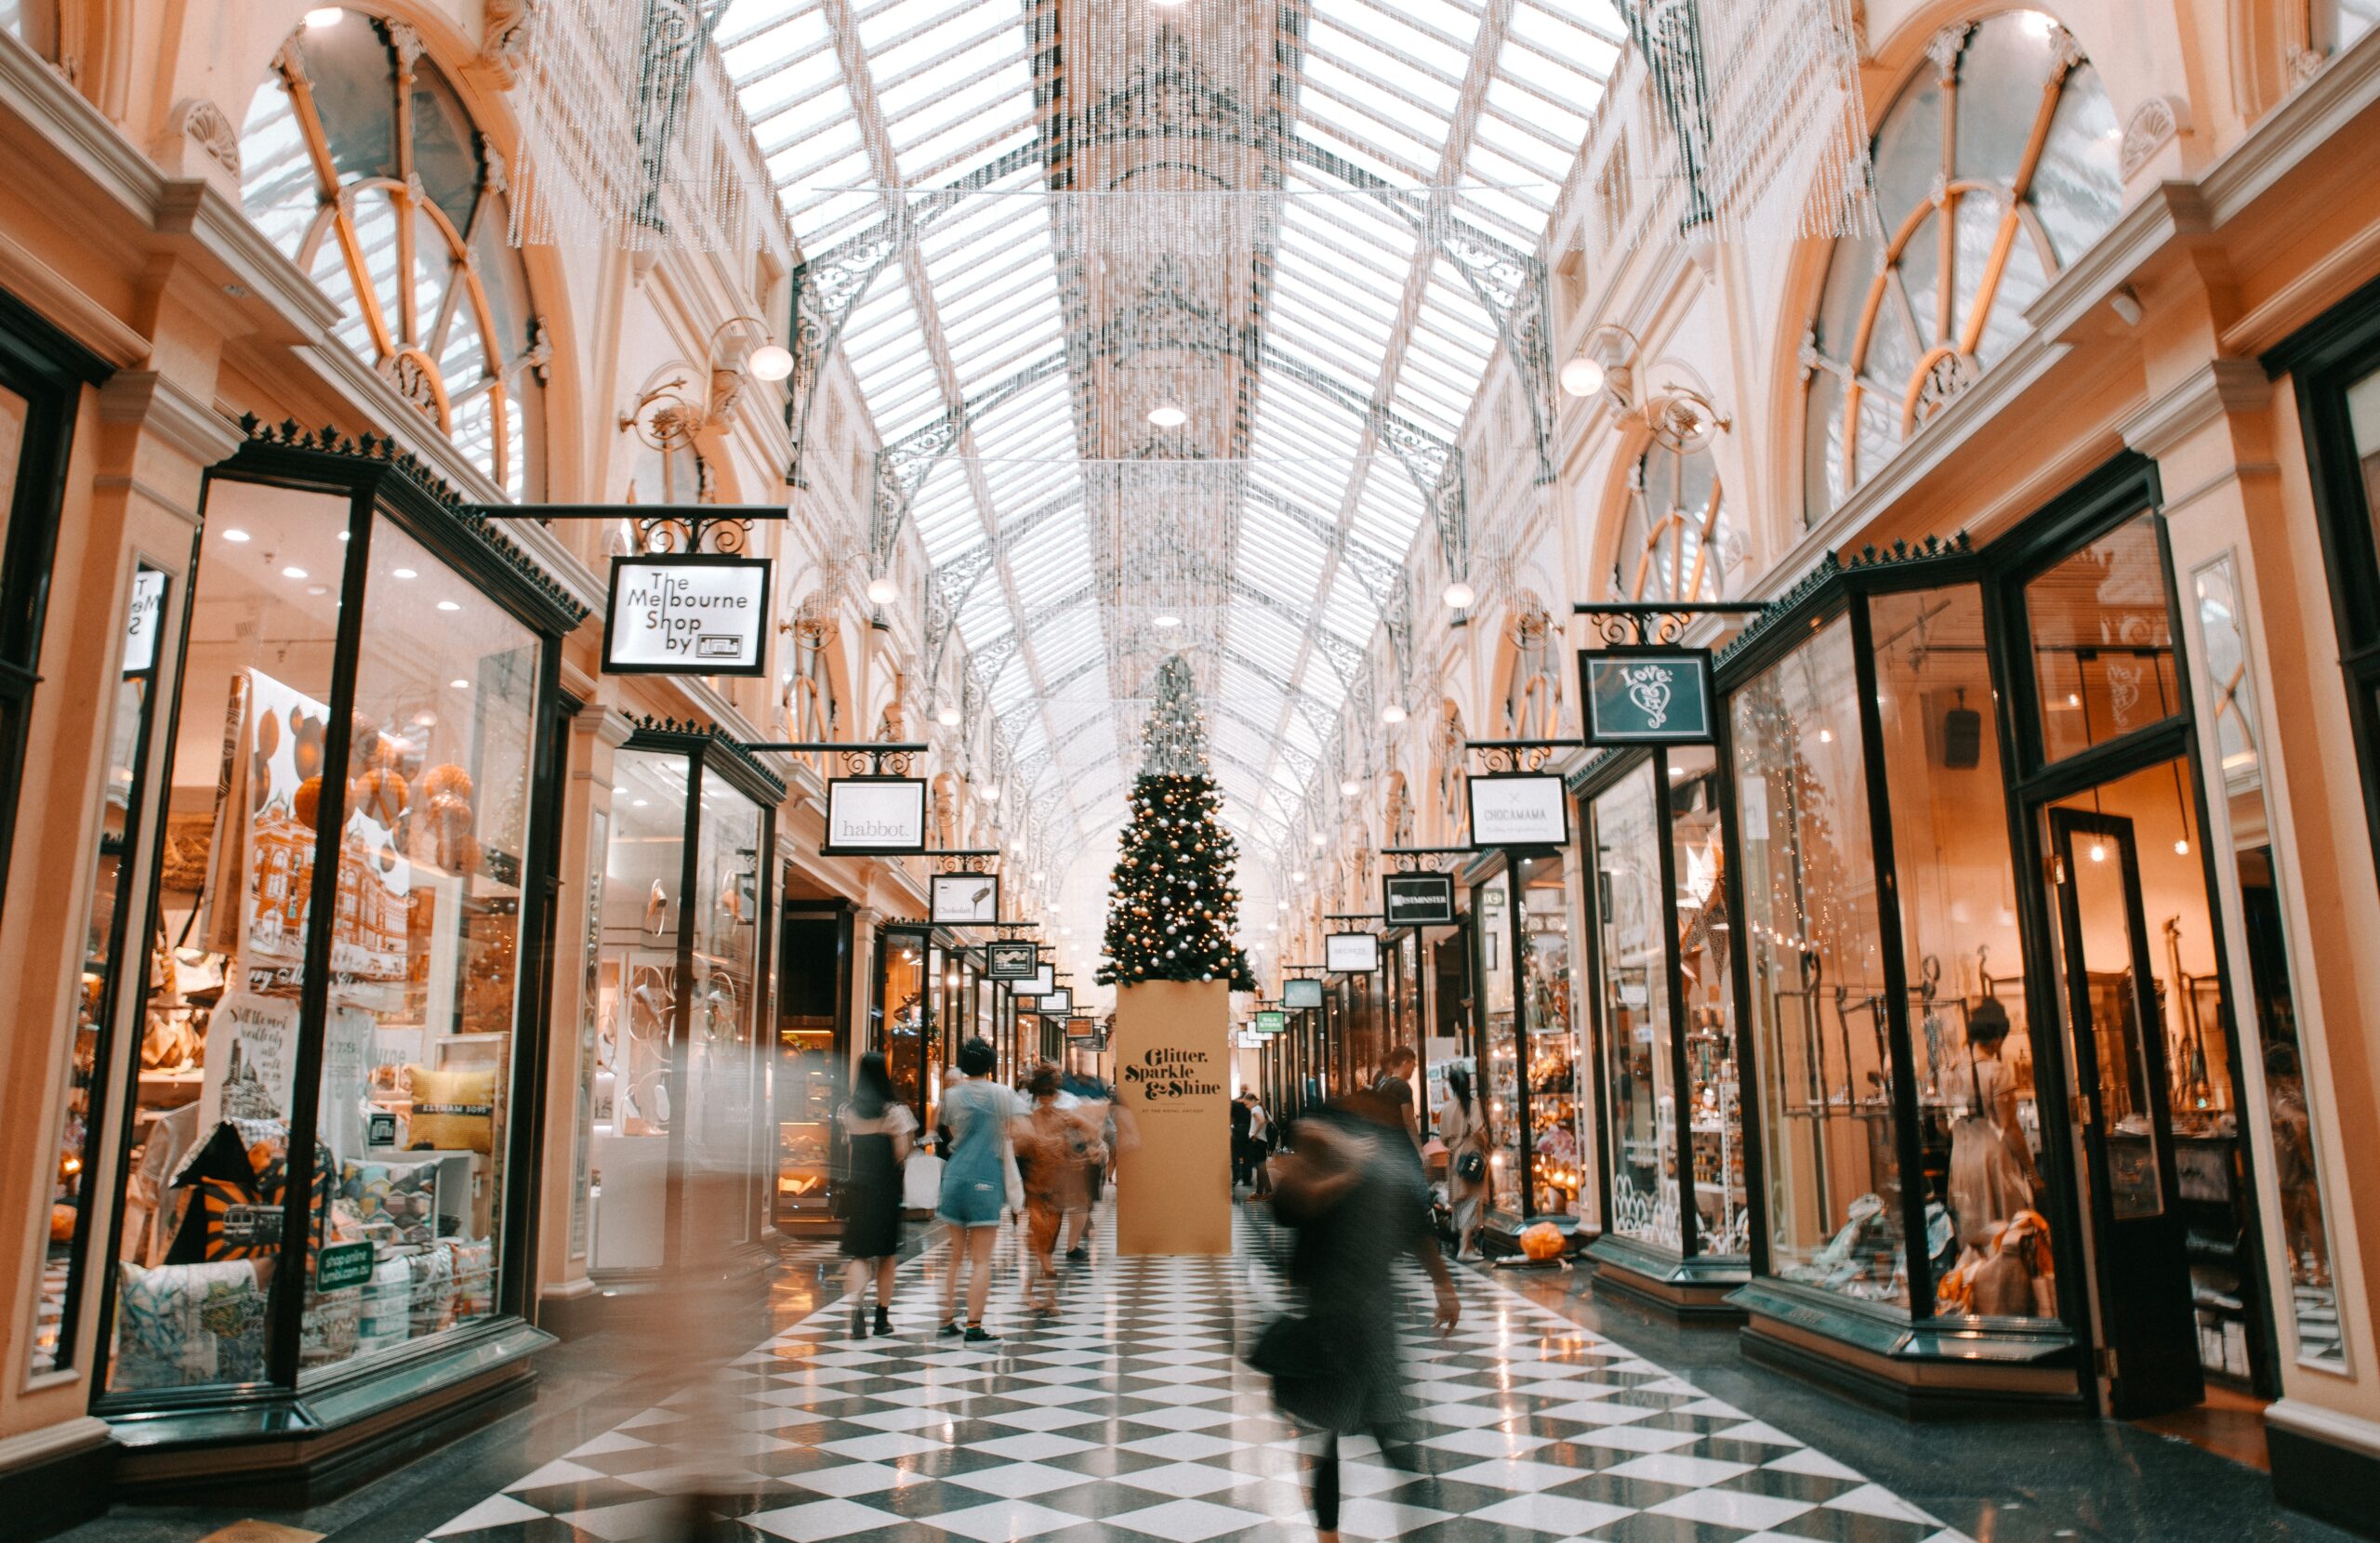 Insights From Twitter on How Pandemic Changed Our Holiday Shopping Behavior This Year